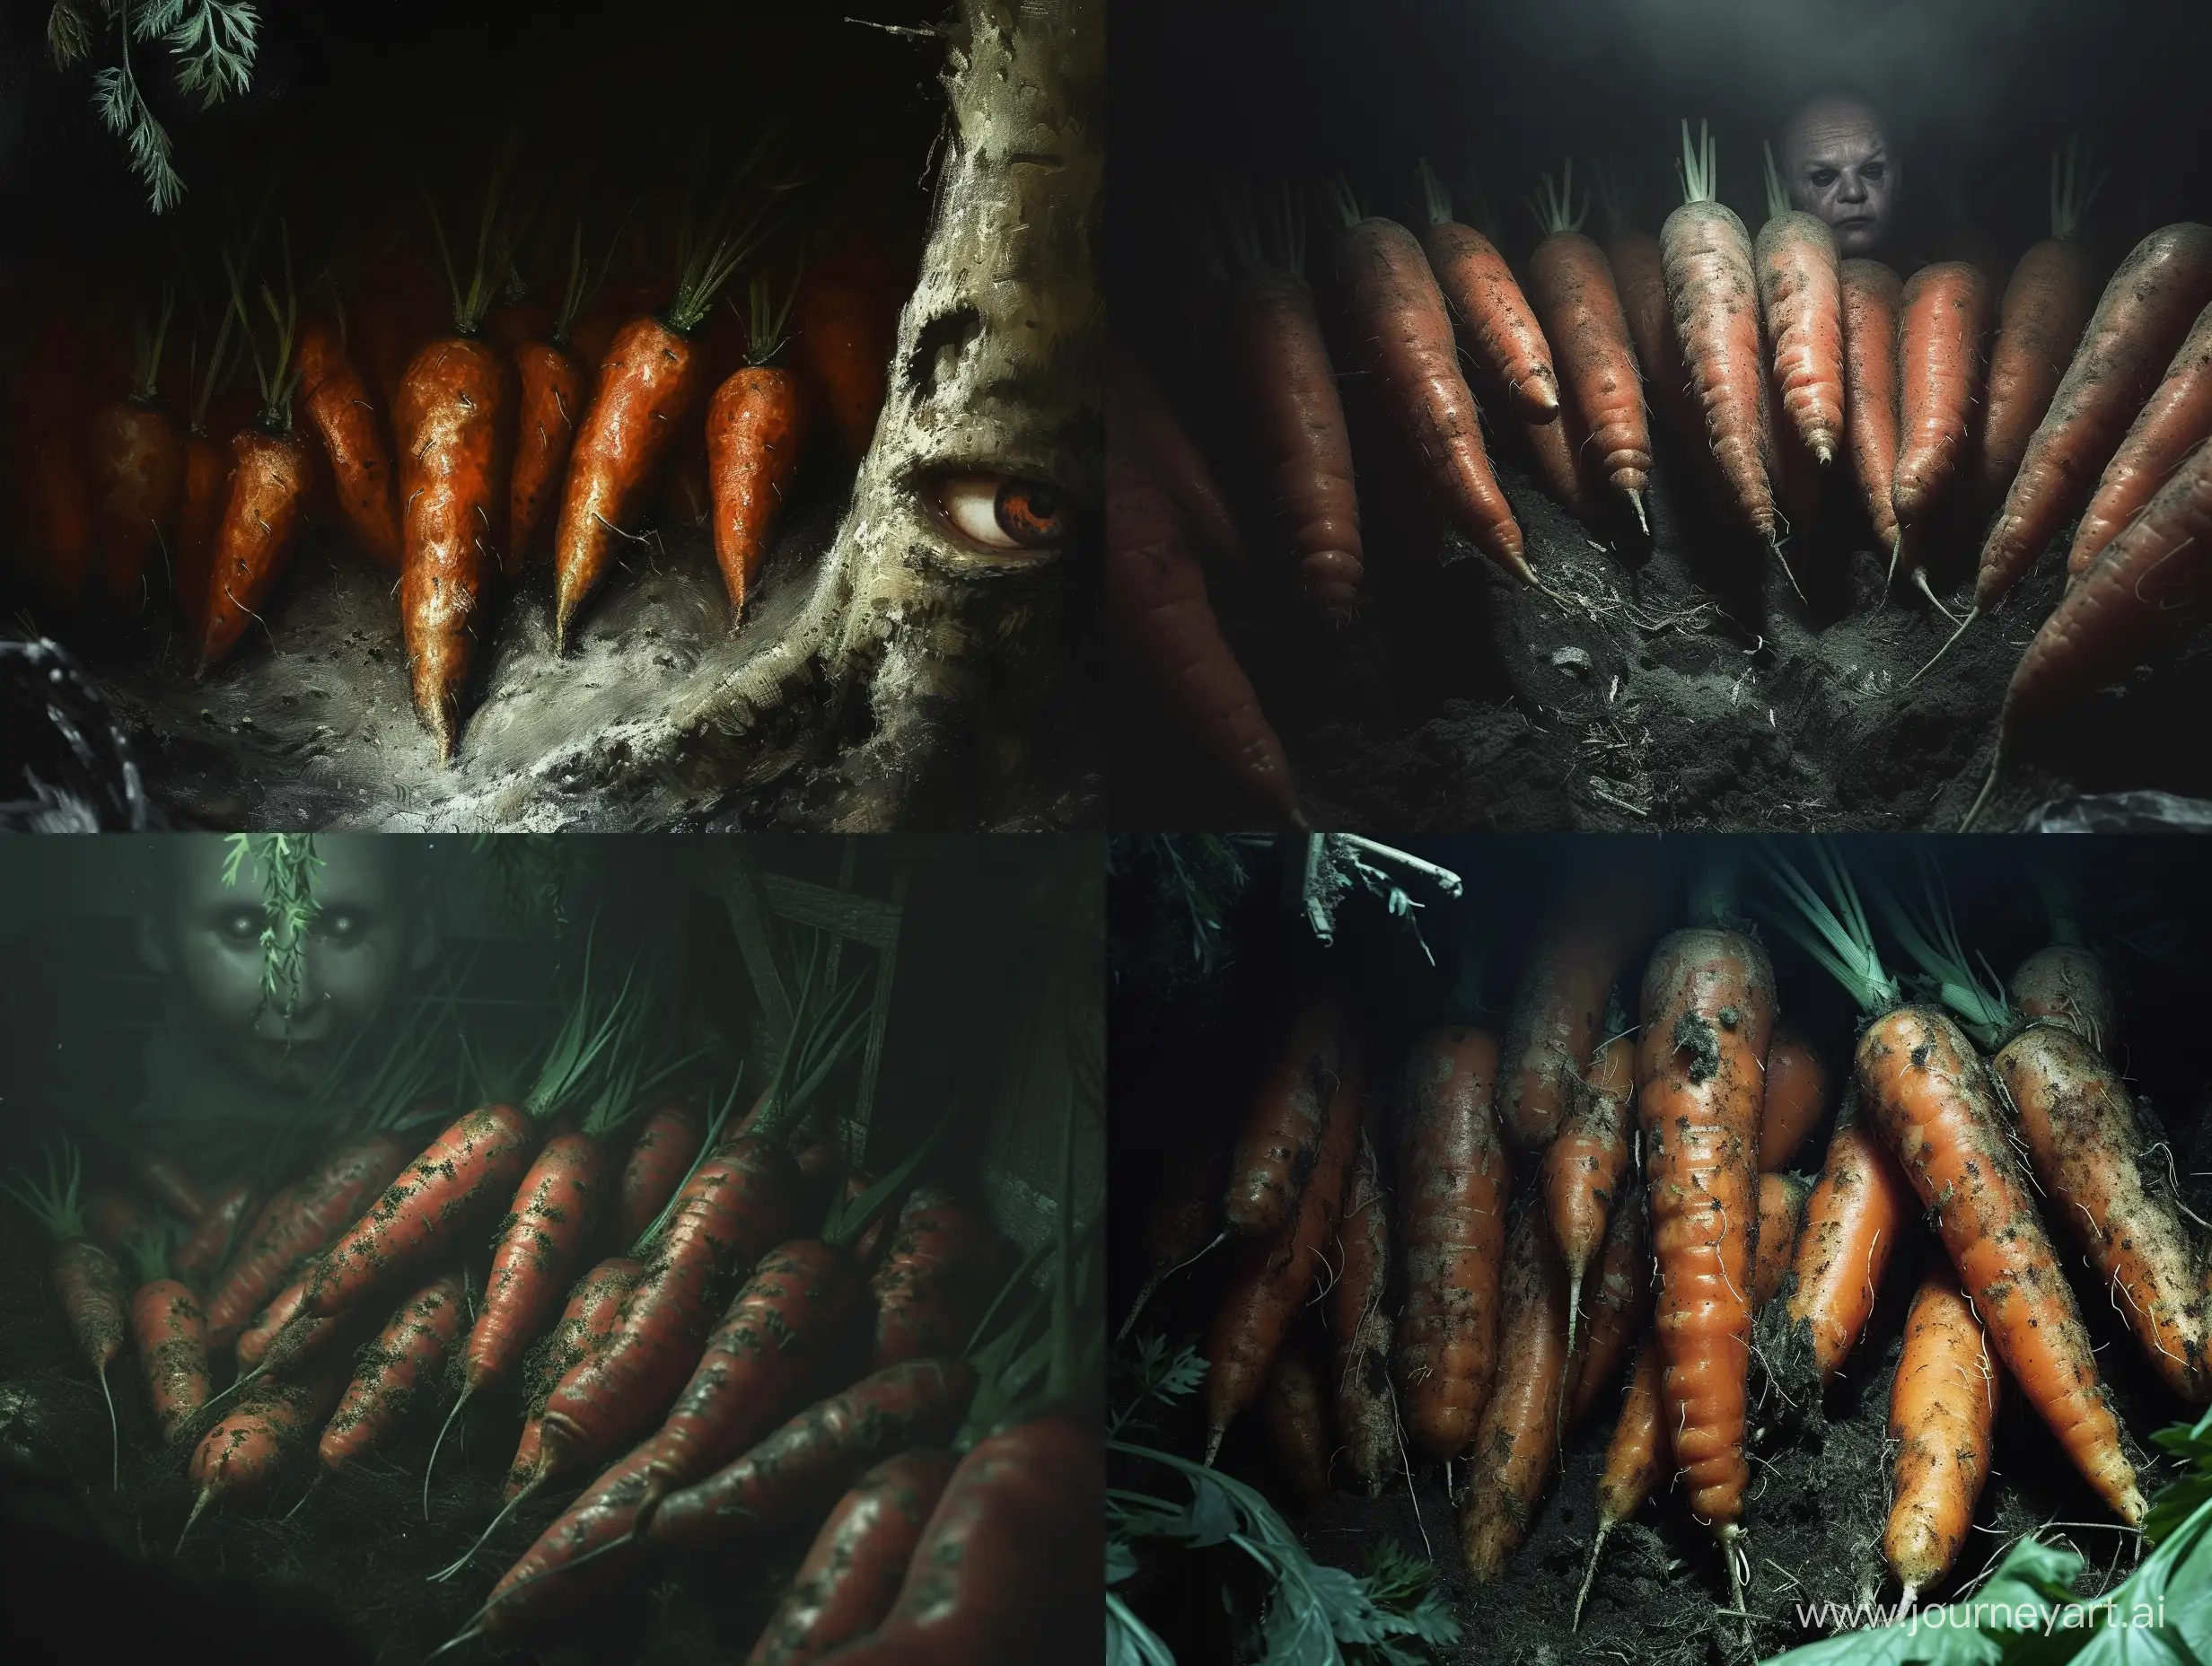 Mysterious-Figure-in-Carrot-Cult-Gathering